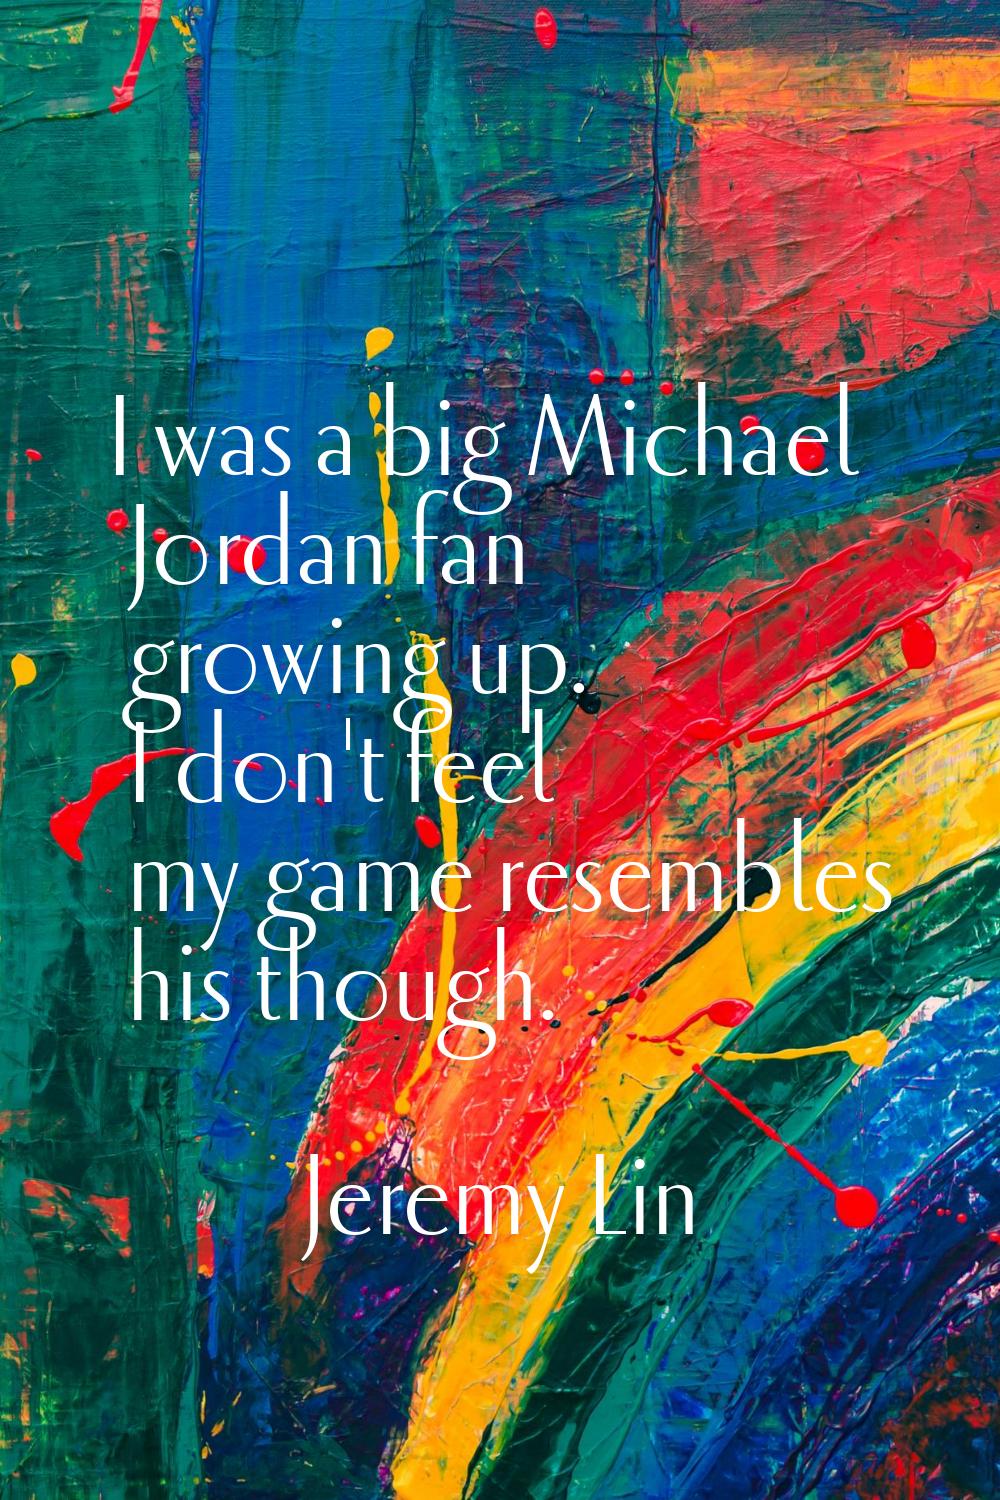 I was a big Michael Jordan fan growing up. I don't feel my game resembles his though.